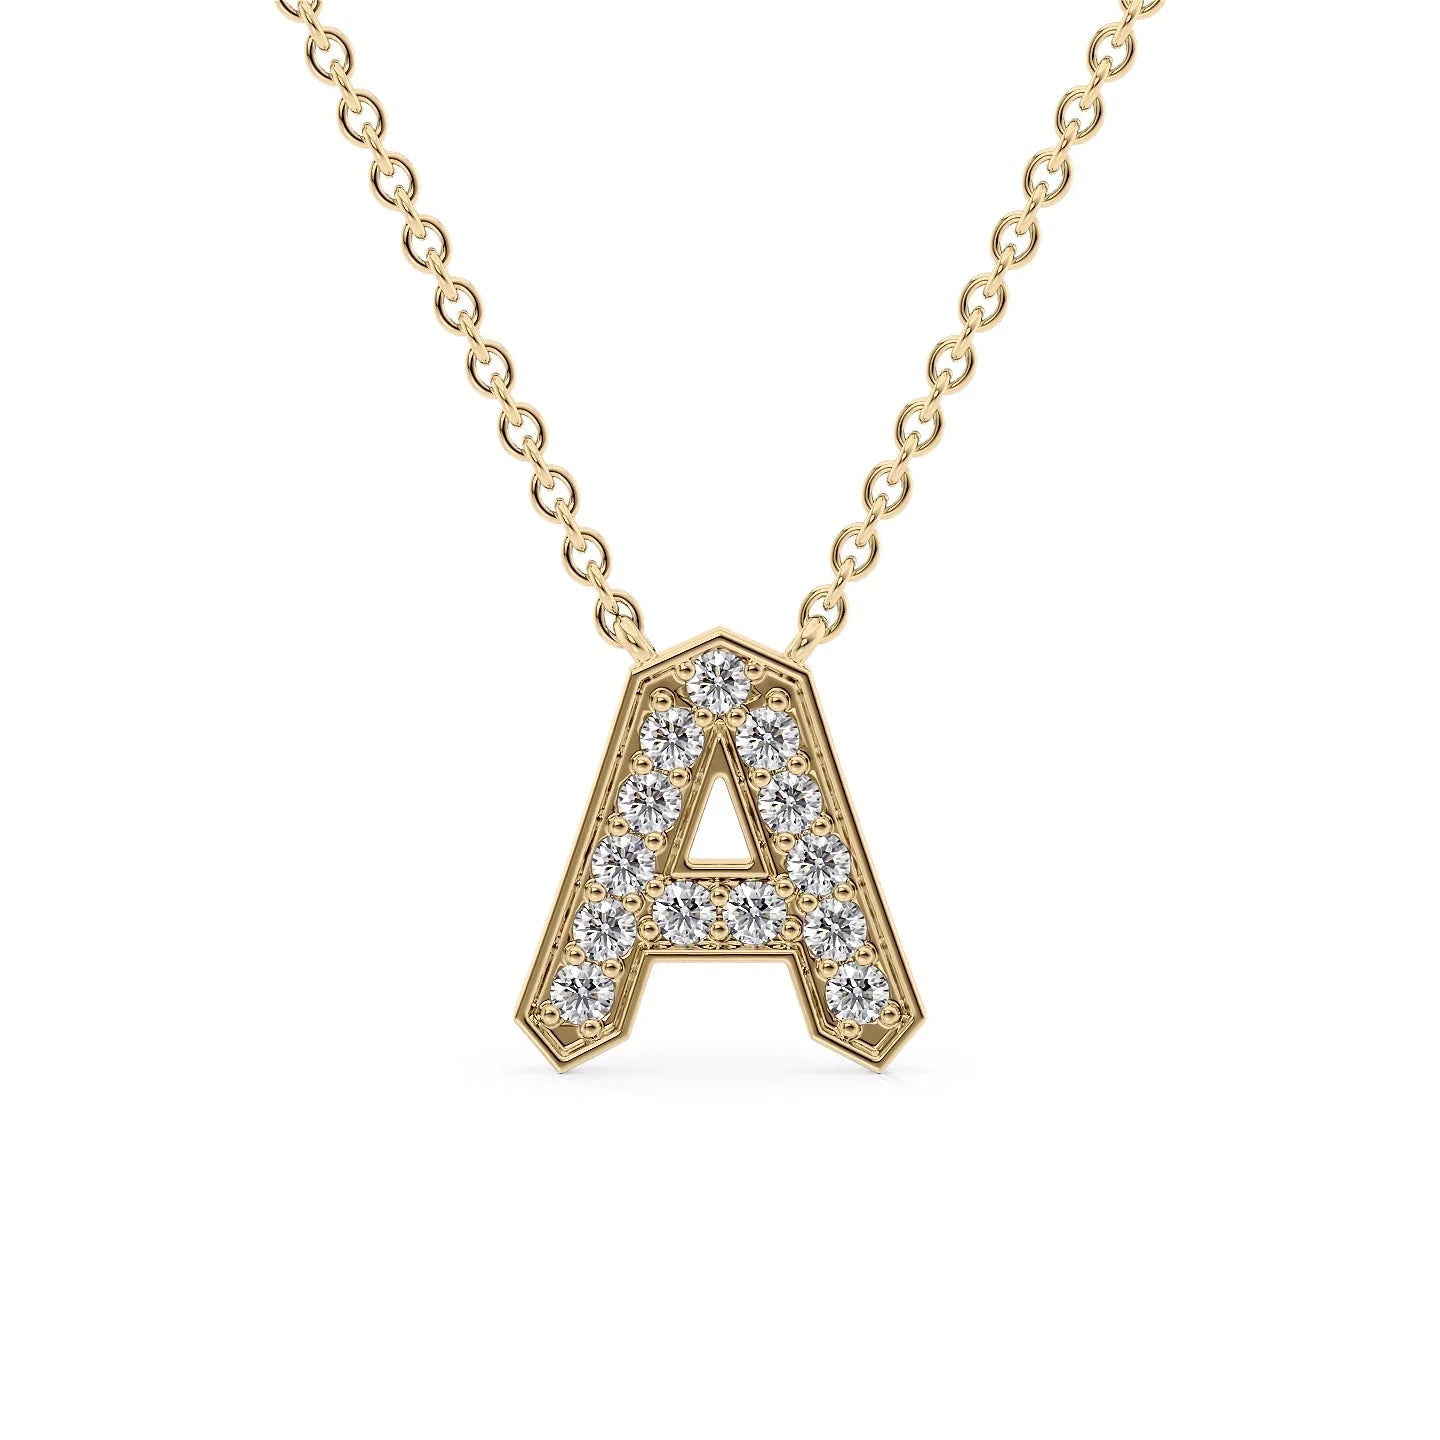 Personalized Diamond Initial Letter Pendant Necklace